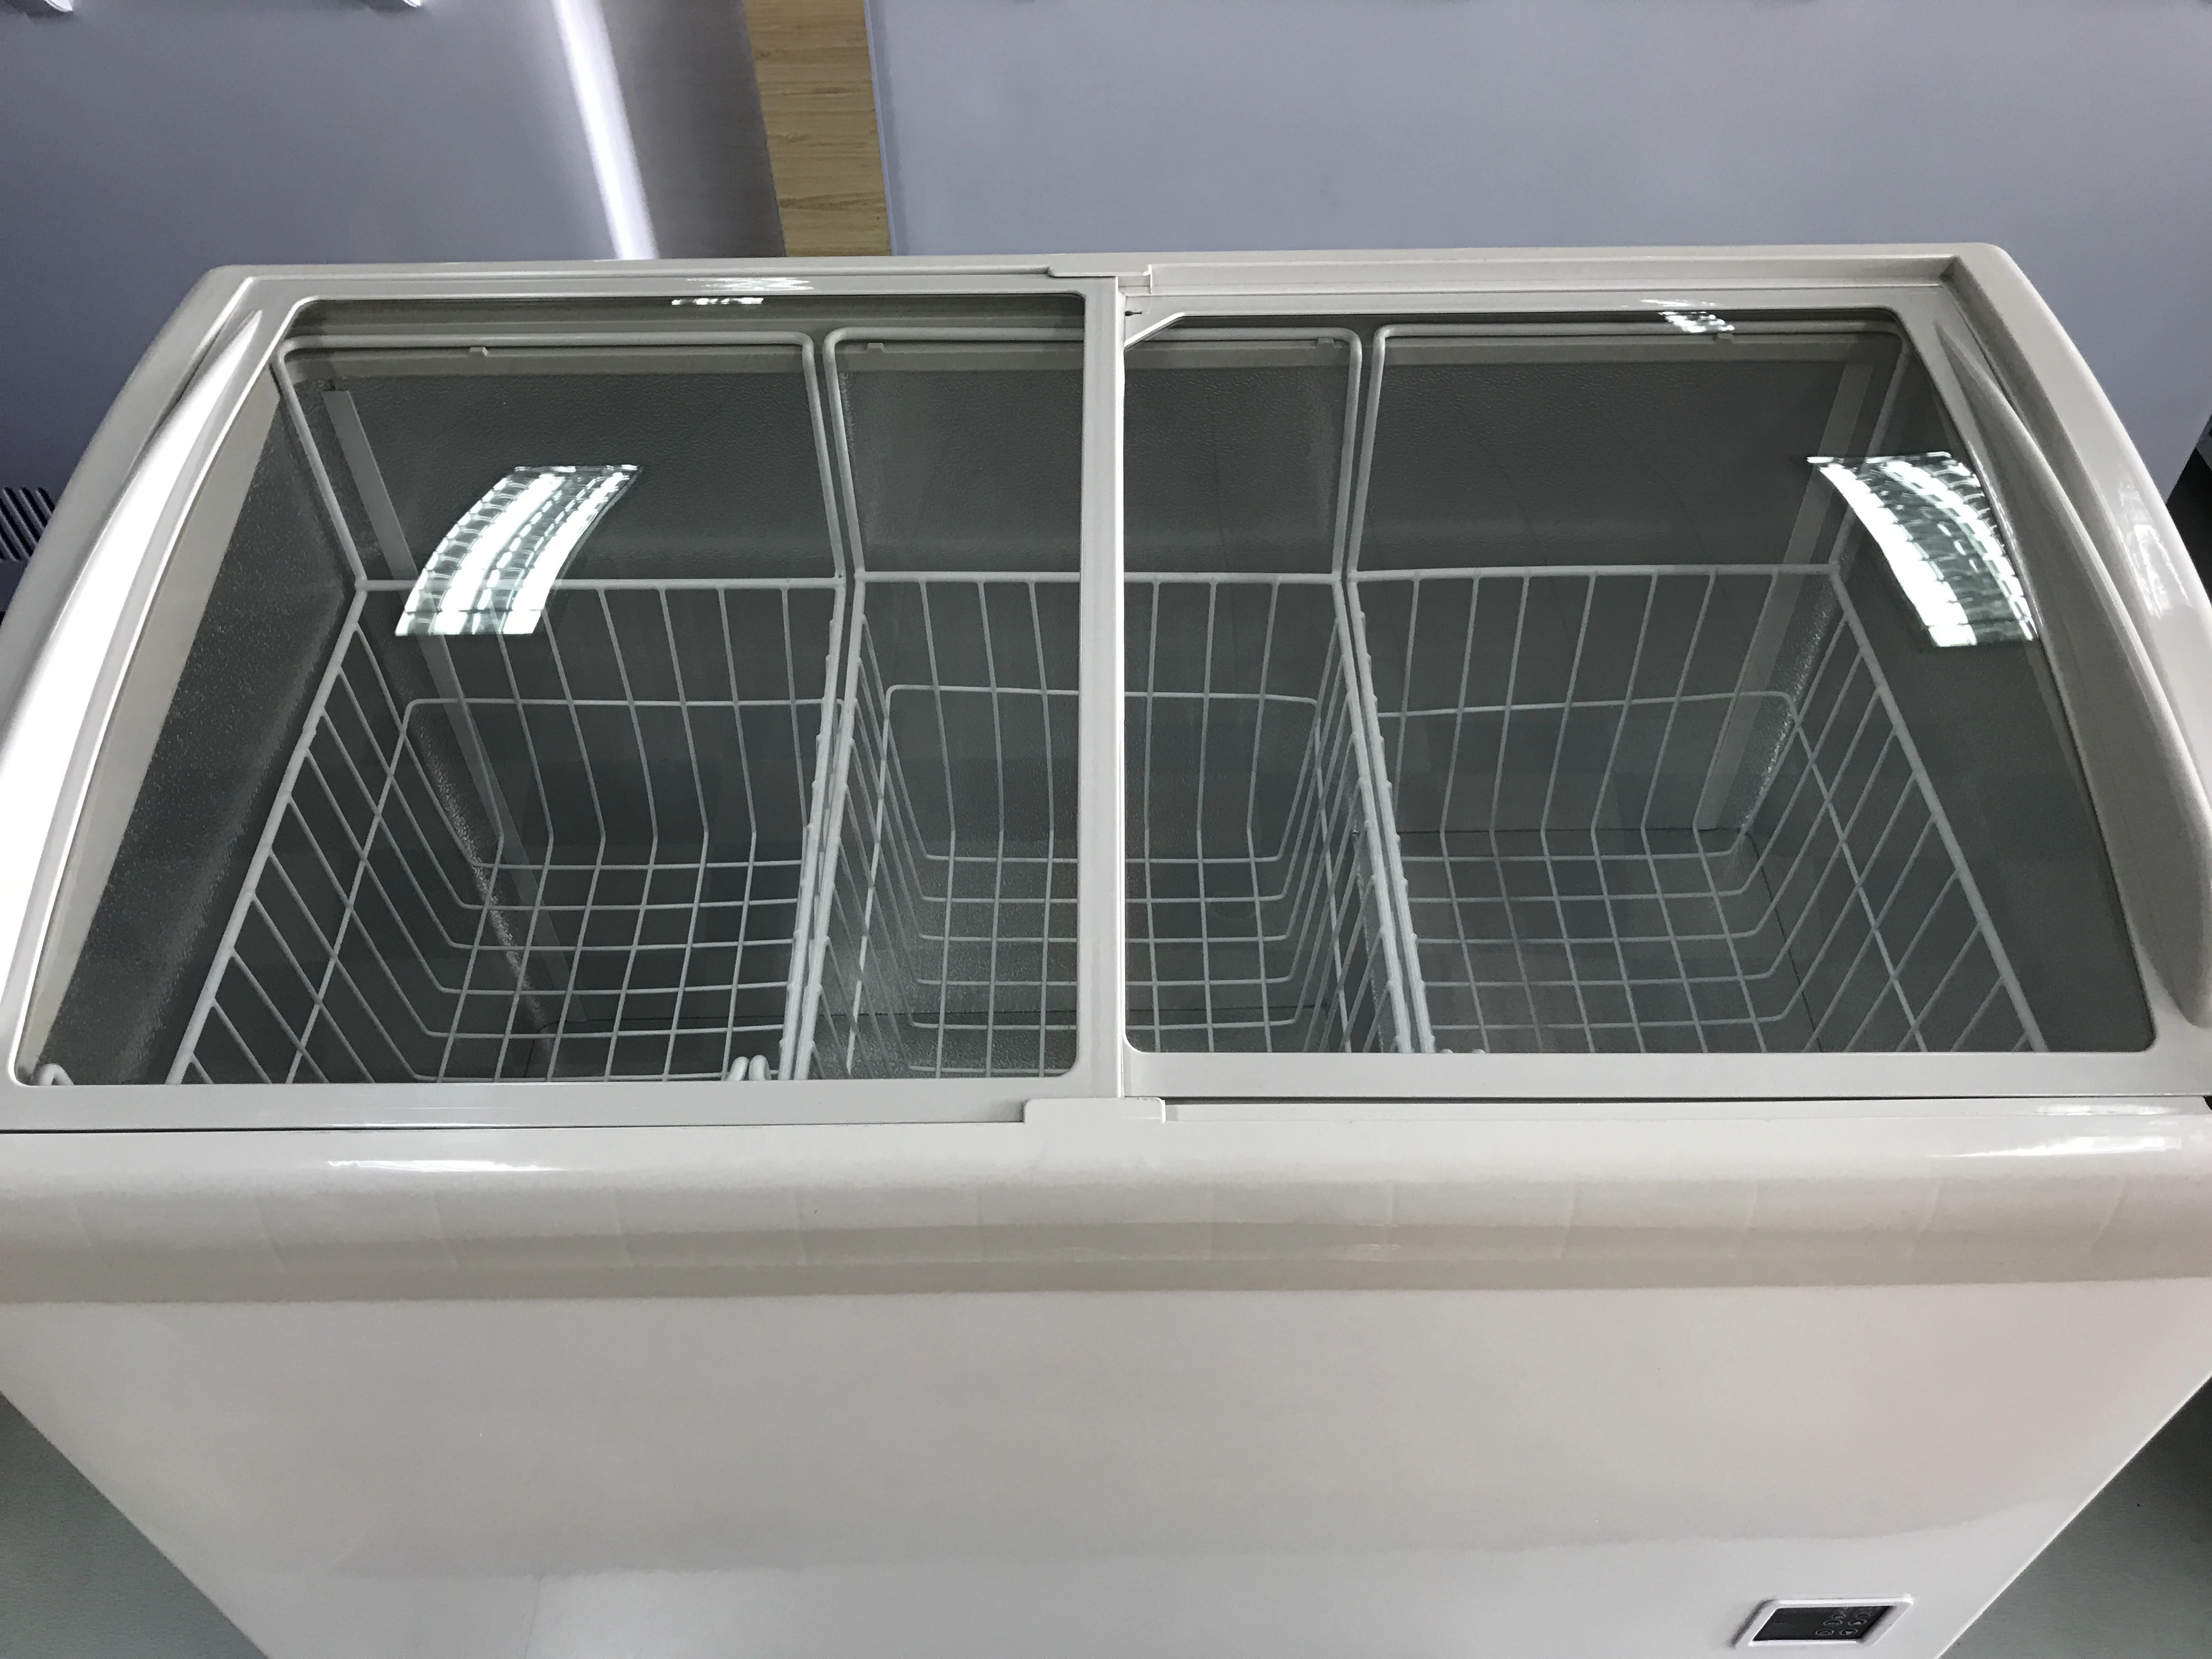 Commercial Tropical Display Cola Double Sliding Glass Top Door Showcase Chest Deep Freezer Price For Ice Cream for Ice Lolly